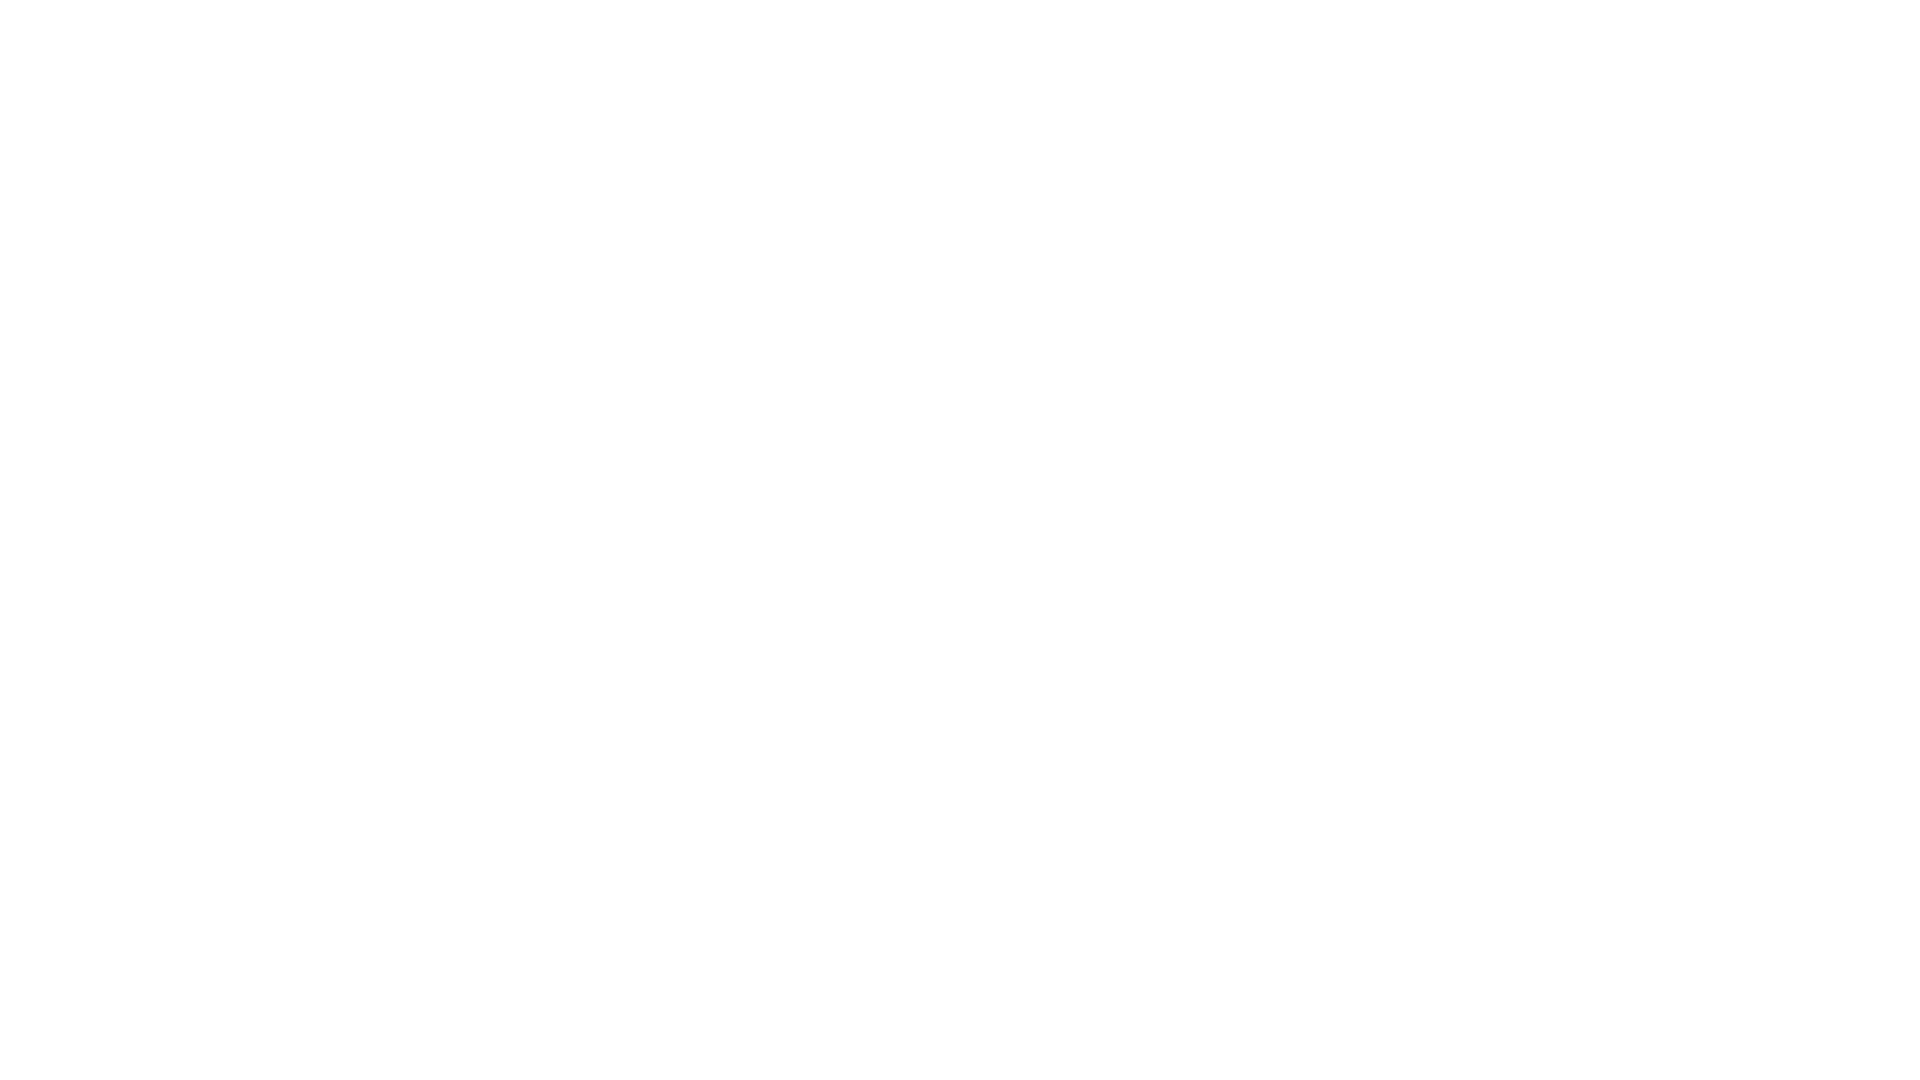 The New Left Review